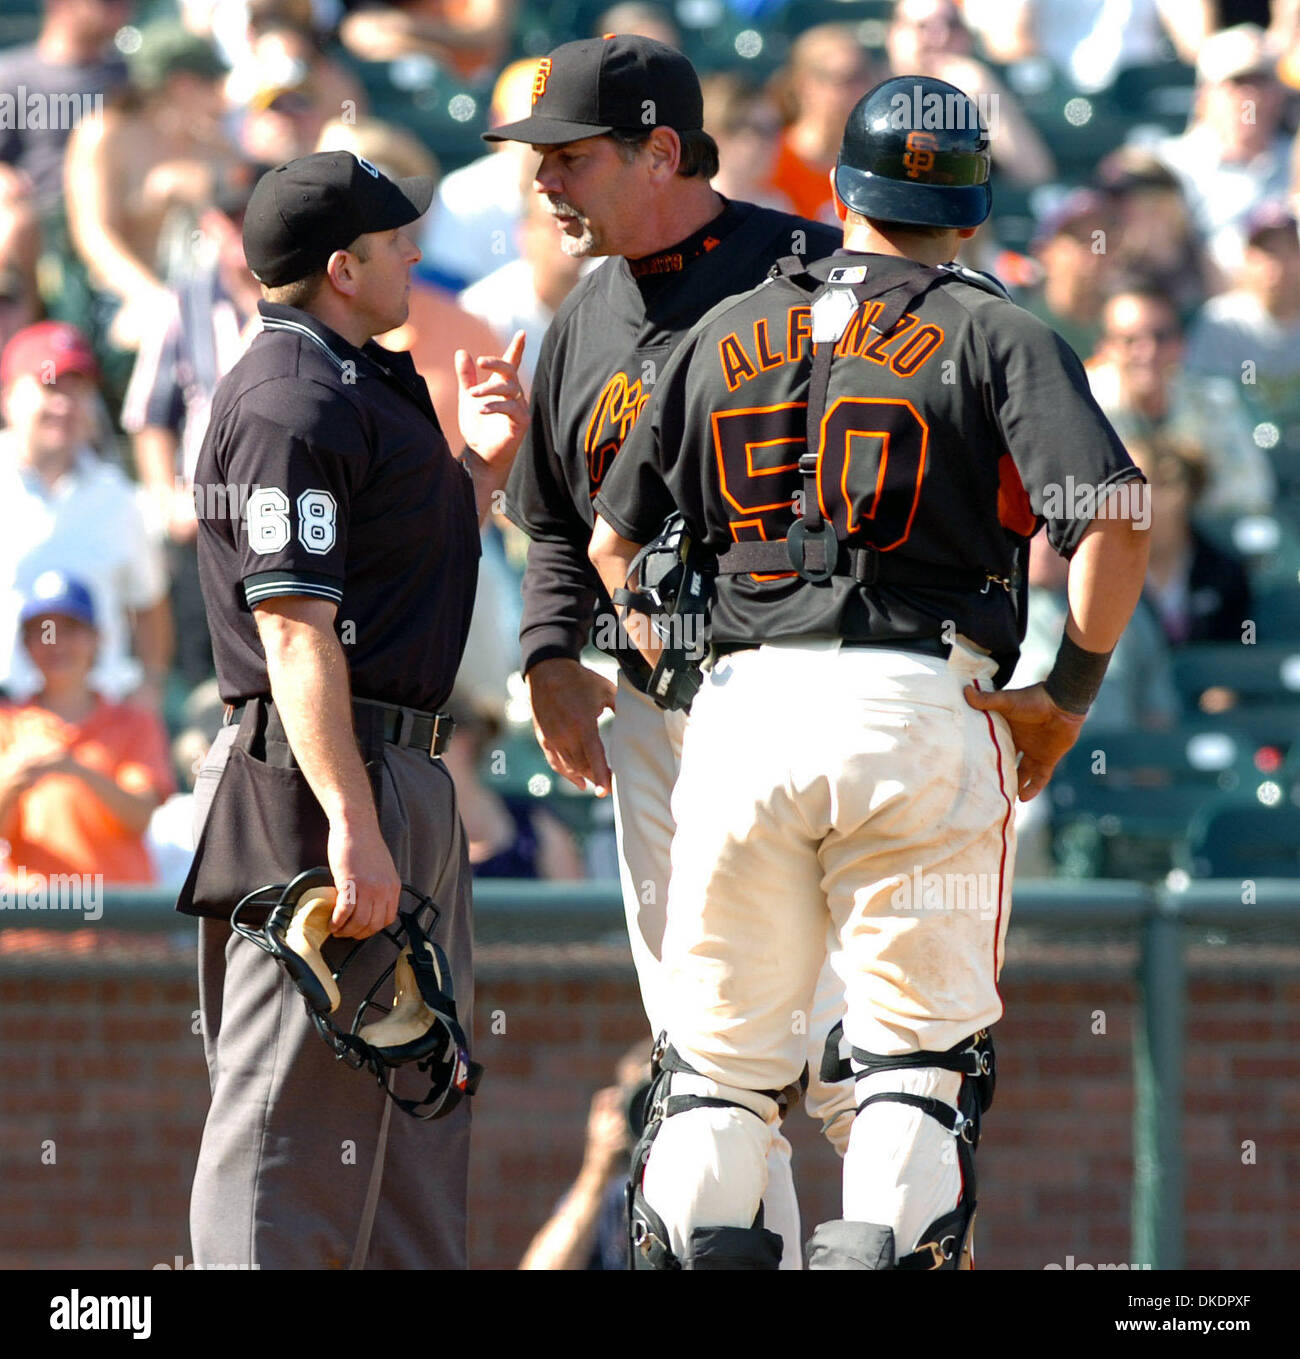 Mar 31, 2007 - San Francisco, CA, USA - San Francisco Giants catcher ELIEZER ALFONSO looks at Giants manager BRUCE BOCHY argue with home plate umpire CHRIS GUCCIONE after he called Oakland A's Lou Merloni safe at home plate increasing the A's lead to 6-4 in the ninth inning of exhibition game with the San Francisco Giants at AT&T Park on Saturday, March 31, 2007 in San Francisco, C Stock Photo